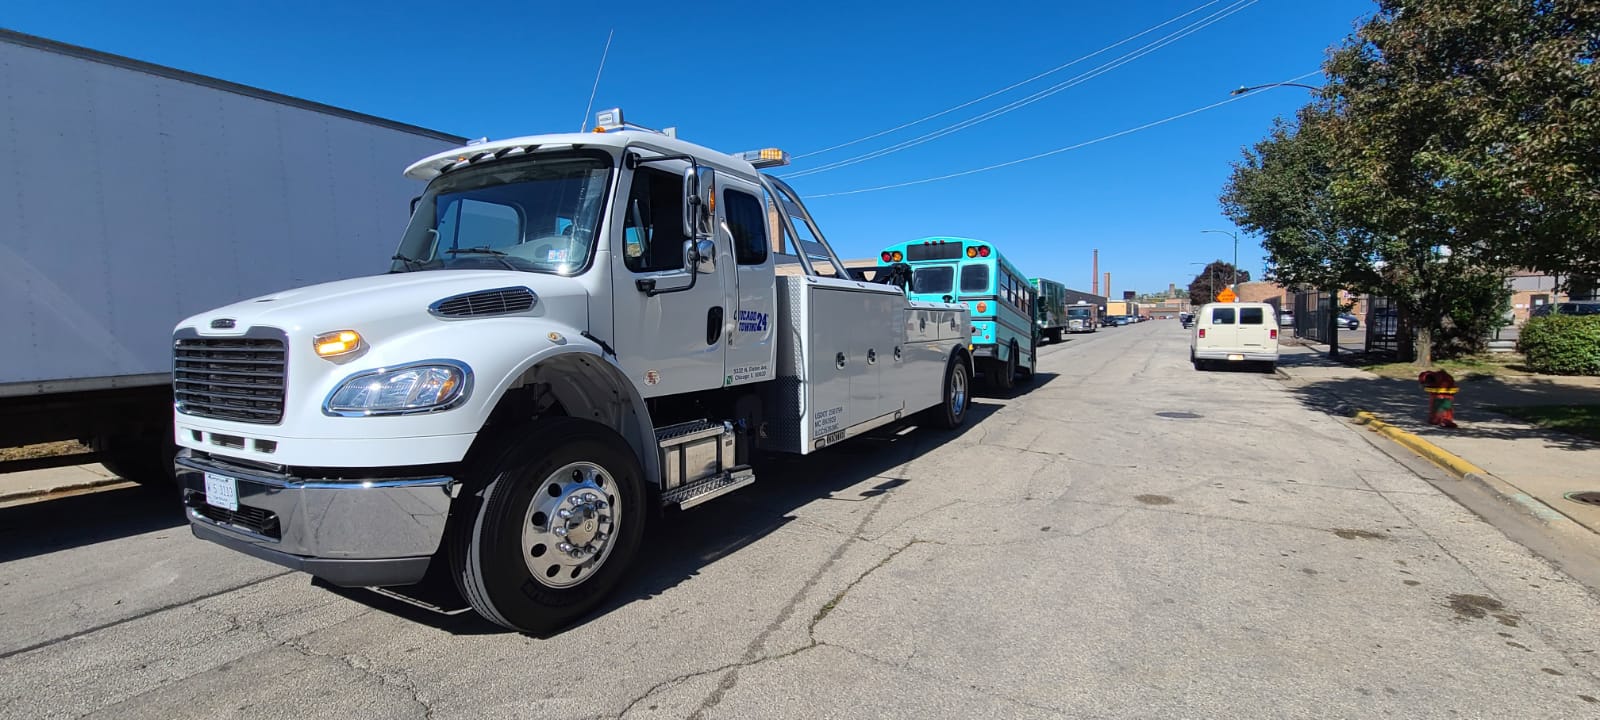 773) 756-1460 | Chicago Towing - A Local Chicago Towing Company Providing Towing  Services in the Entire Chicago Area